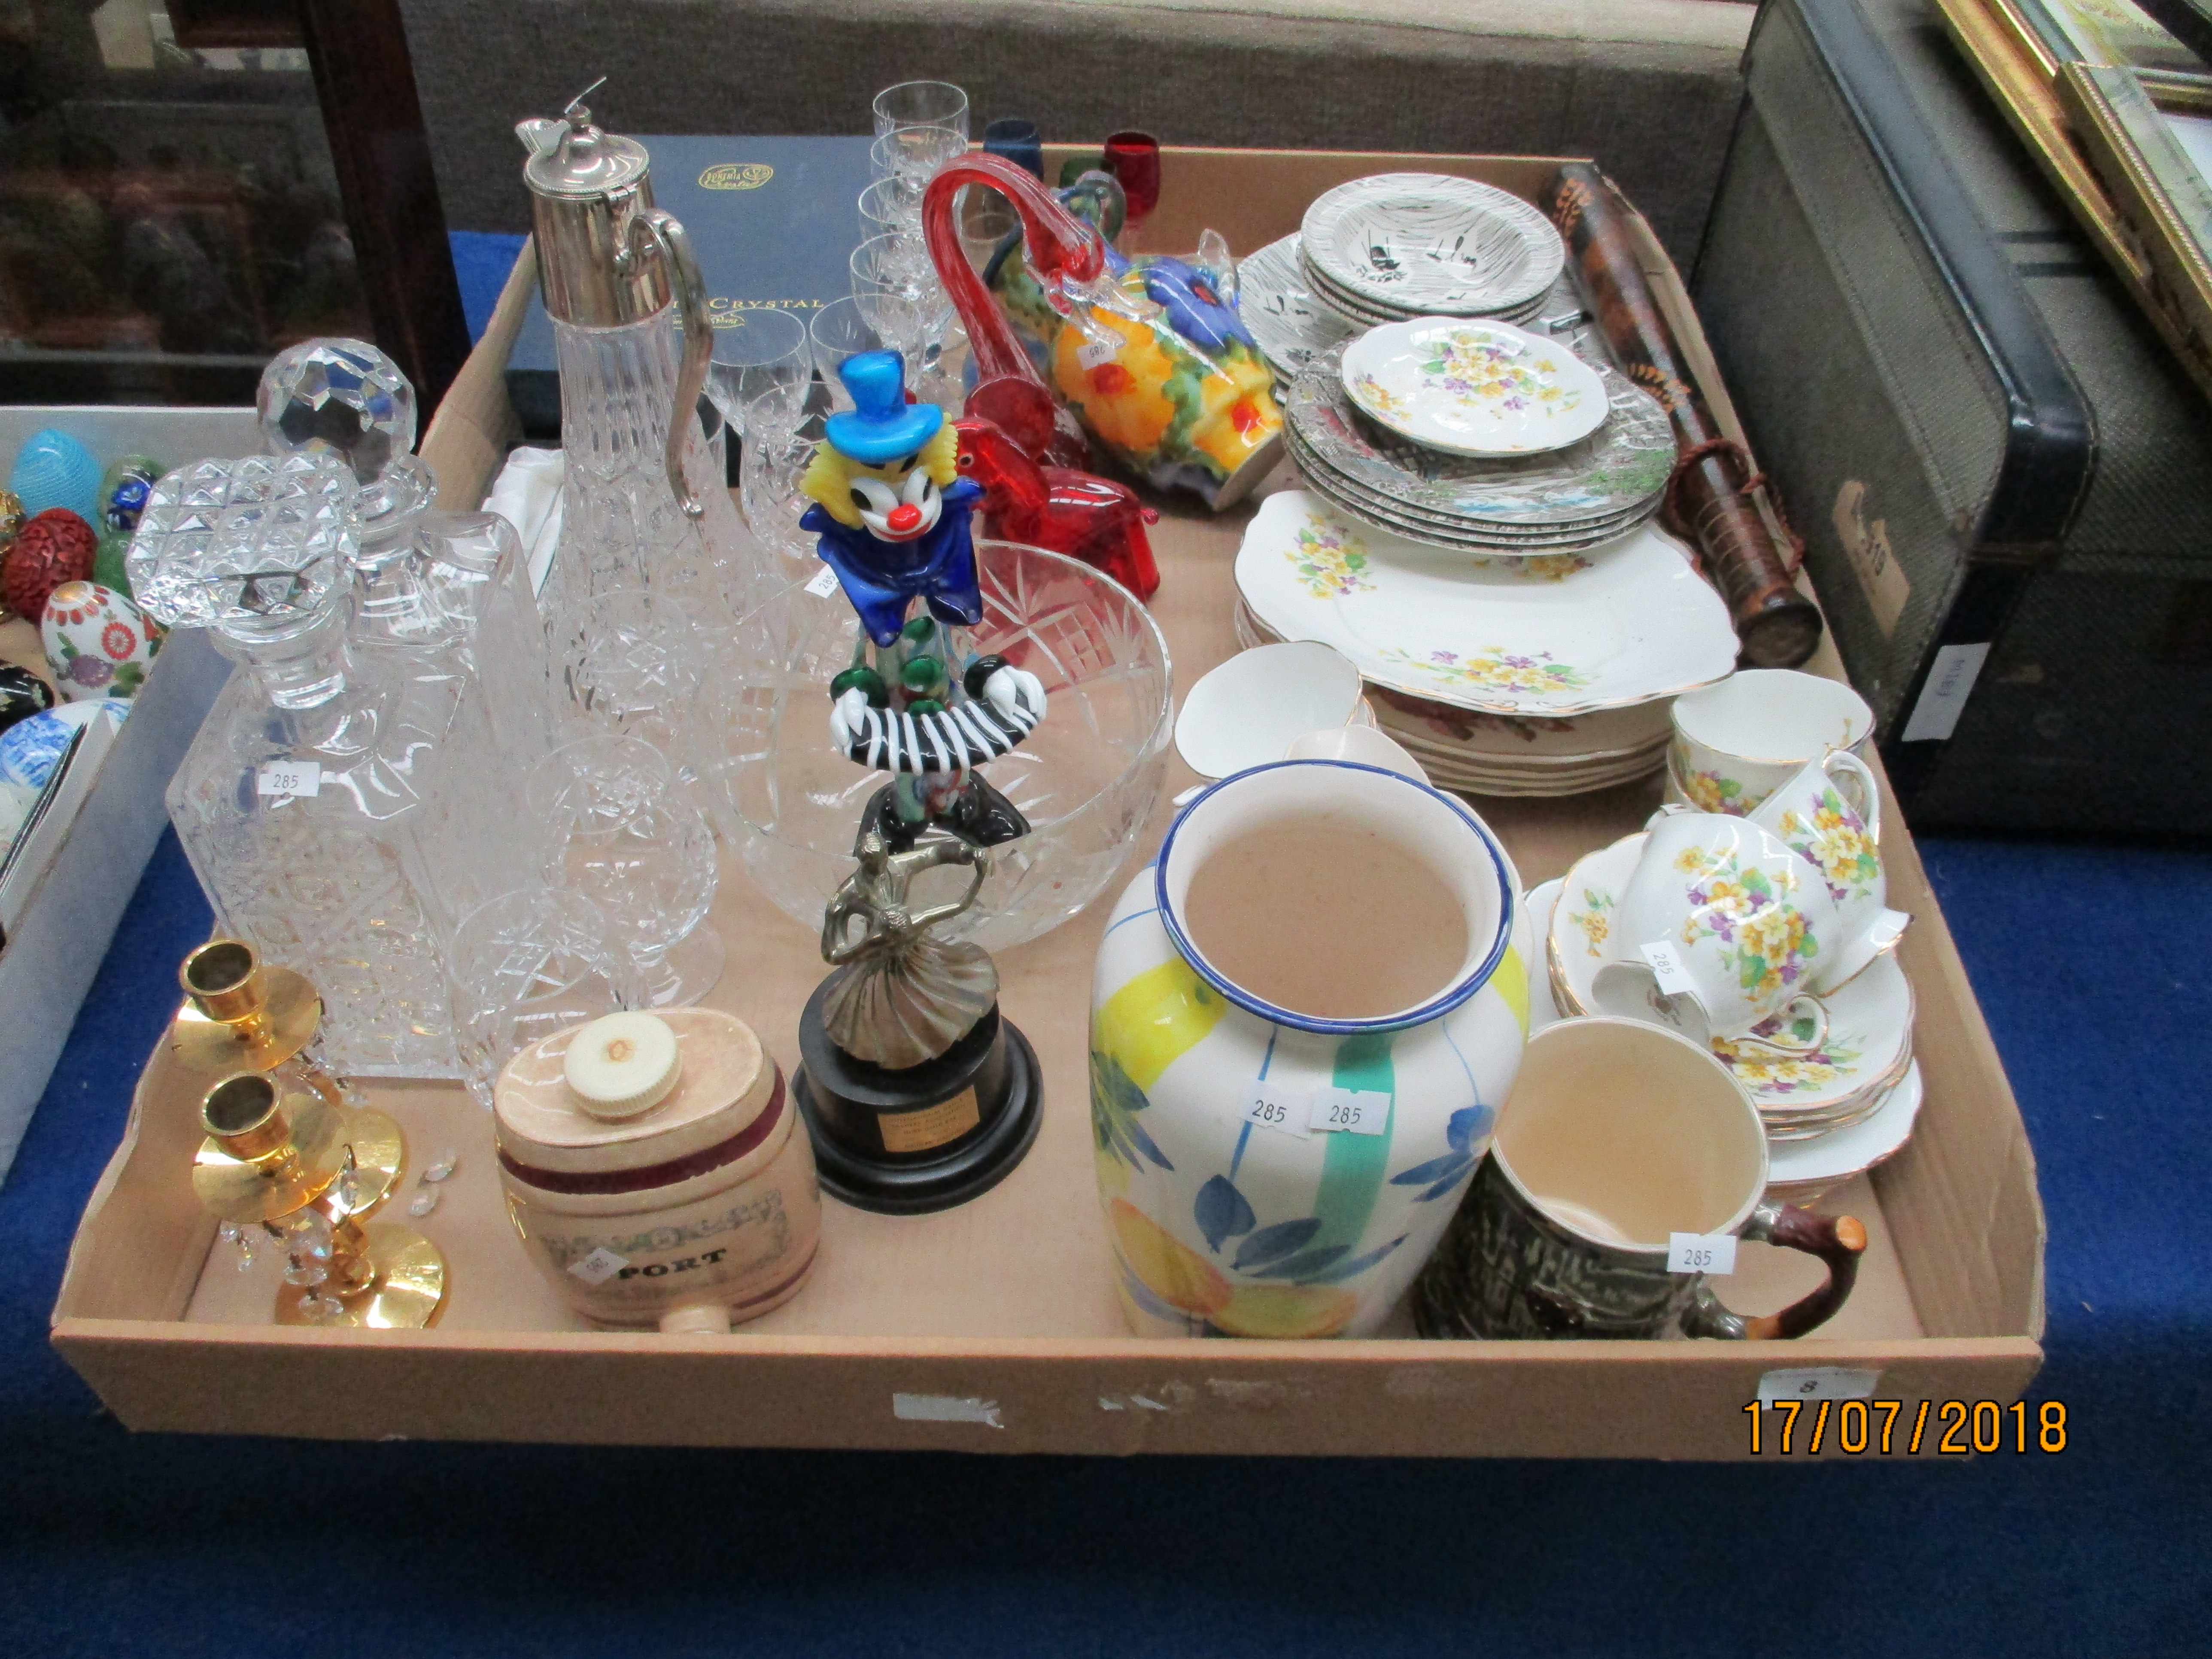 Contents to tray - Ridgeway Pottery "Homemaker" dinner and tea plates, fruit dishes,